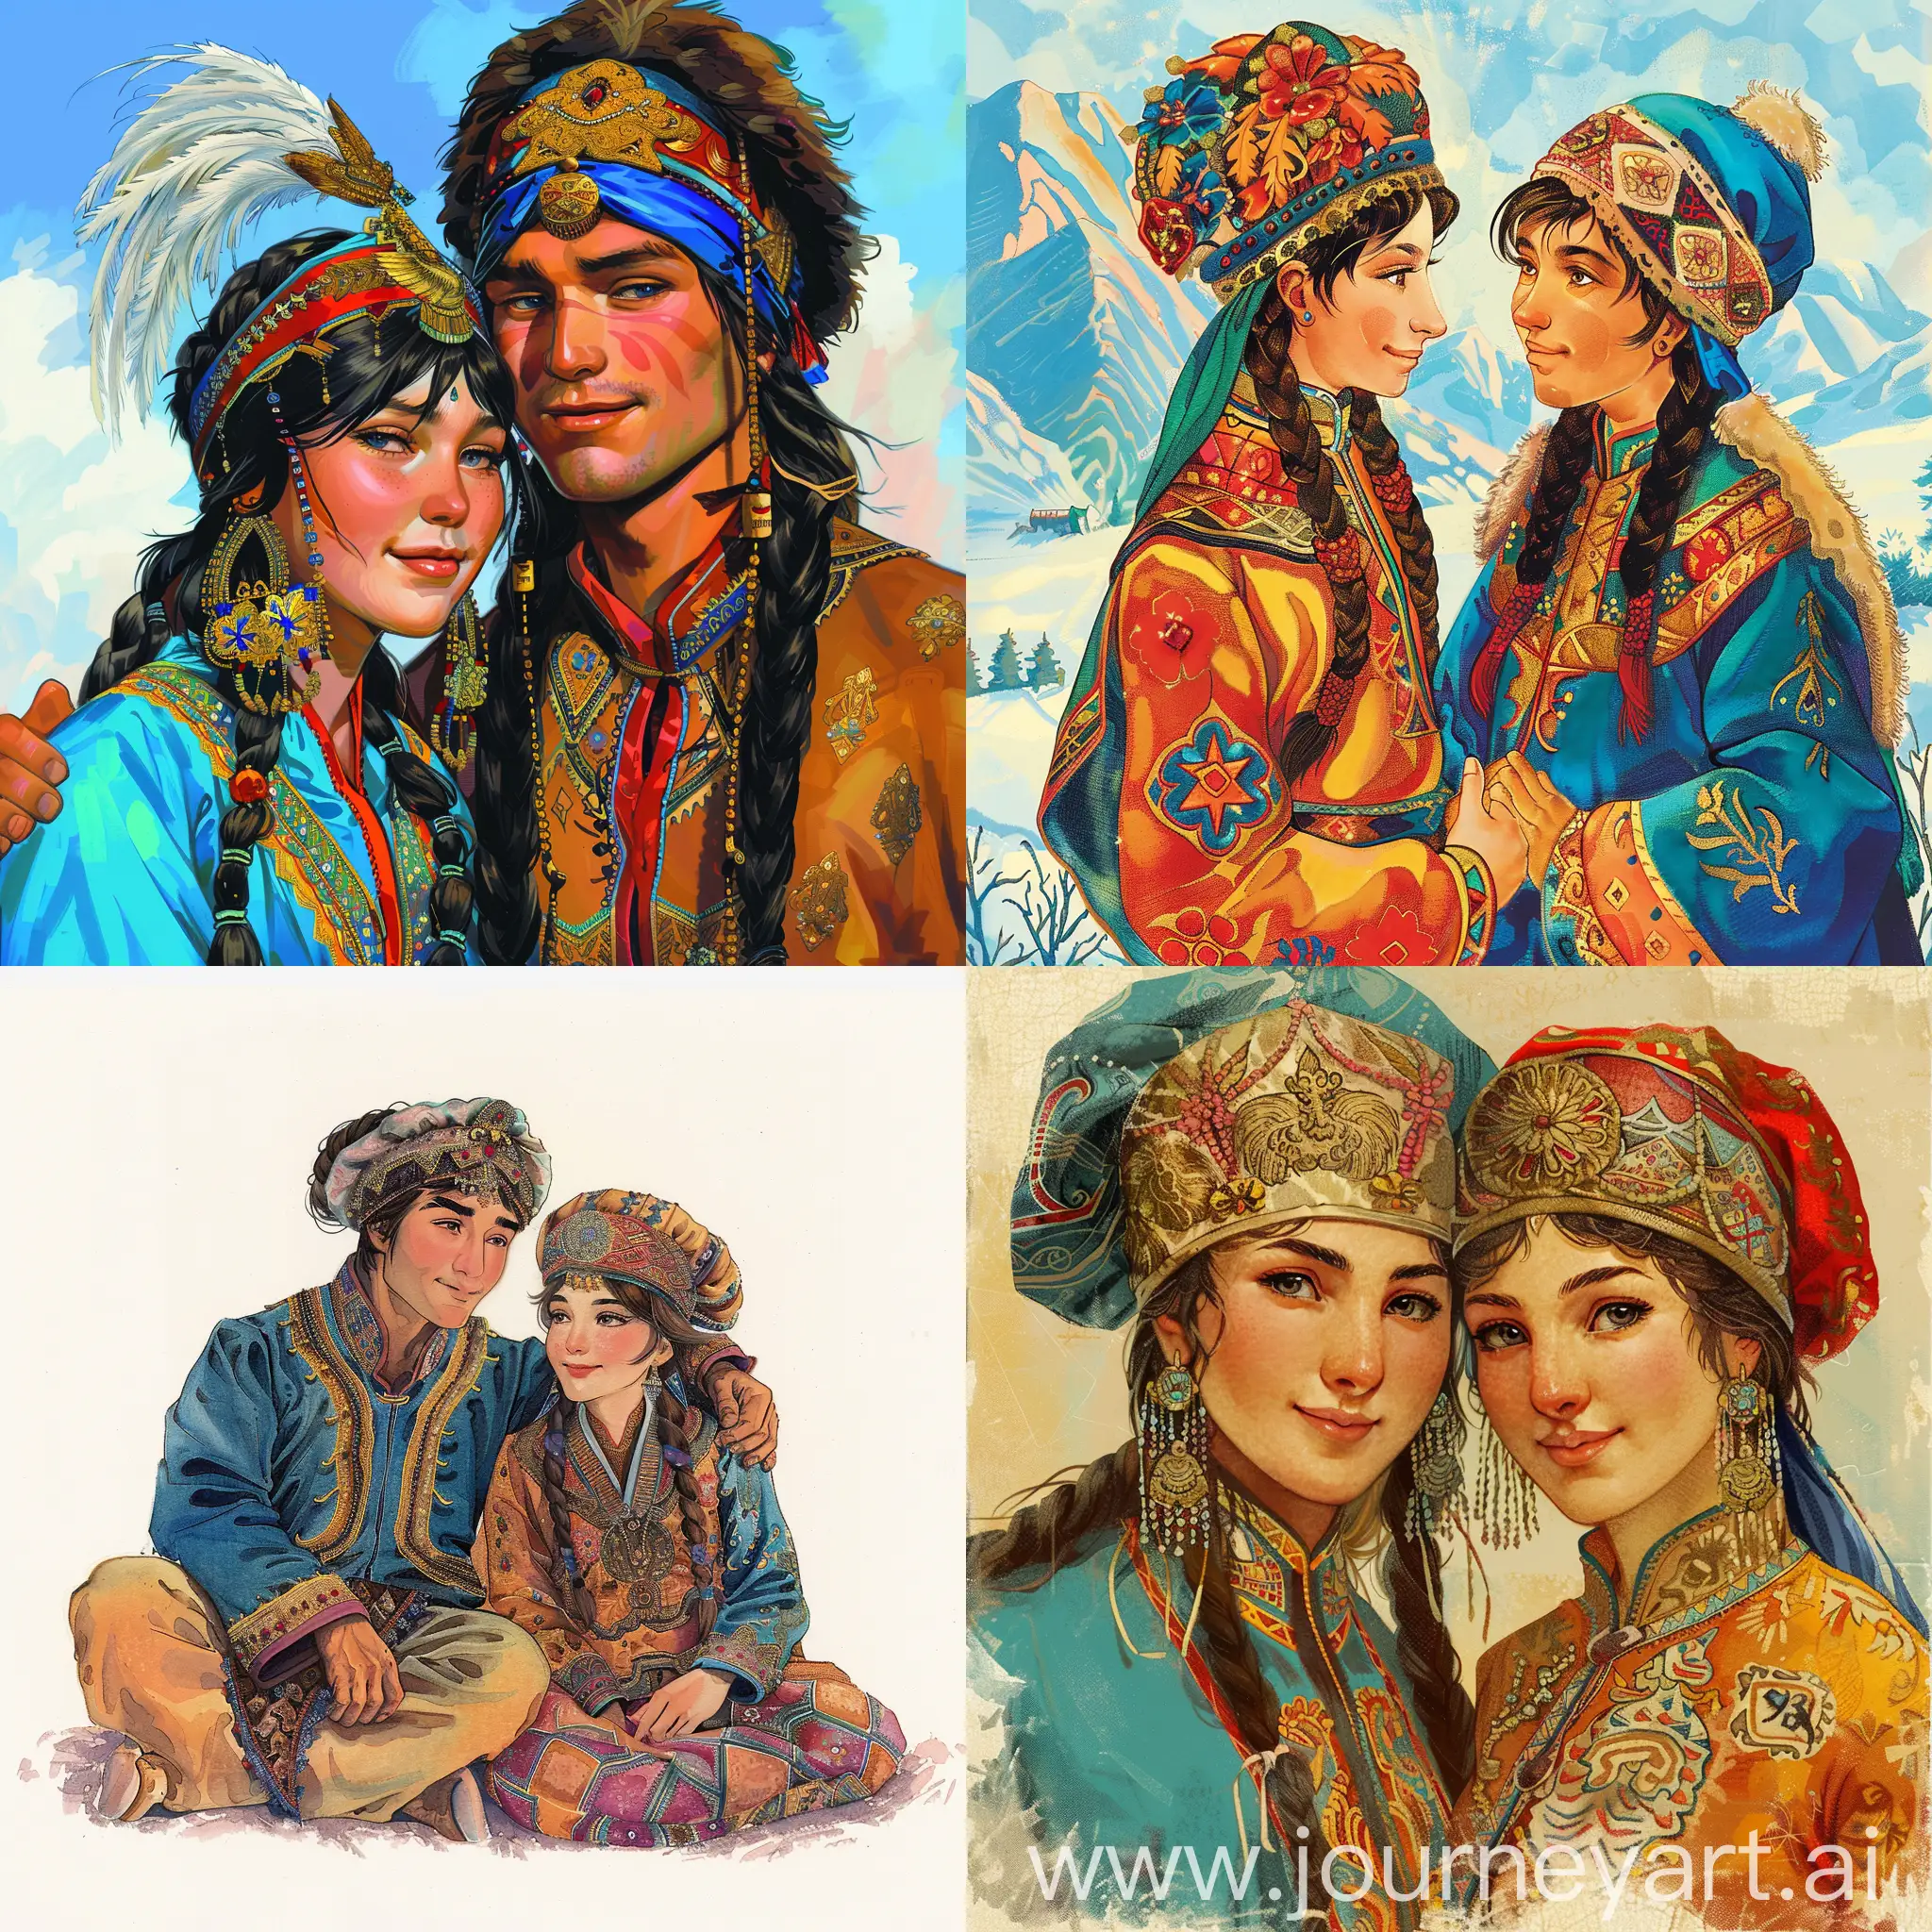 Kazakh-Lovers-Embracing-Amidst-Traditional-Storybook-Setting